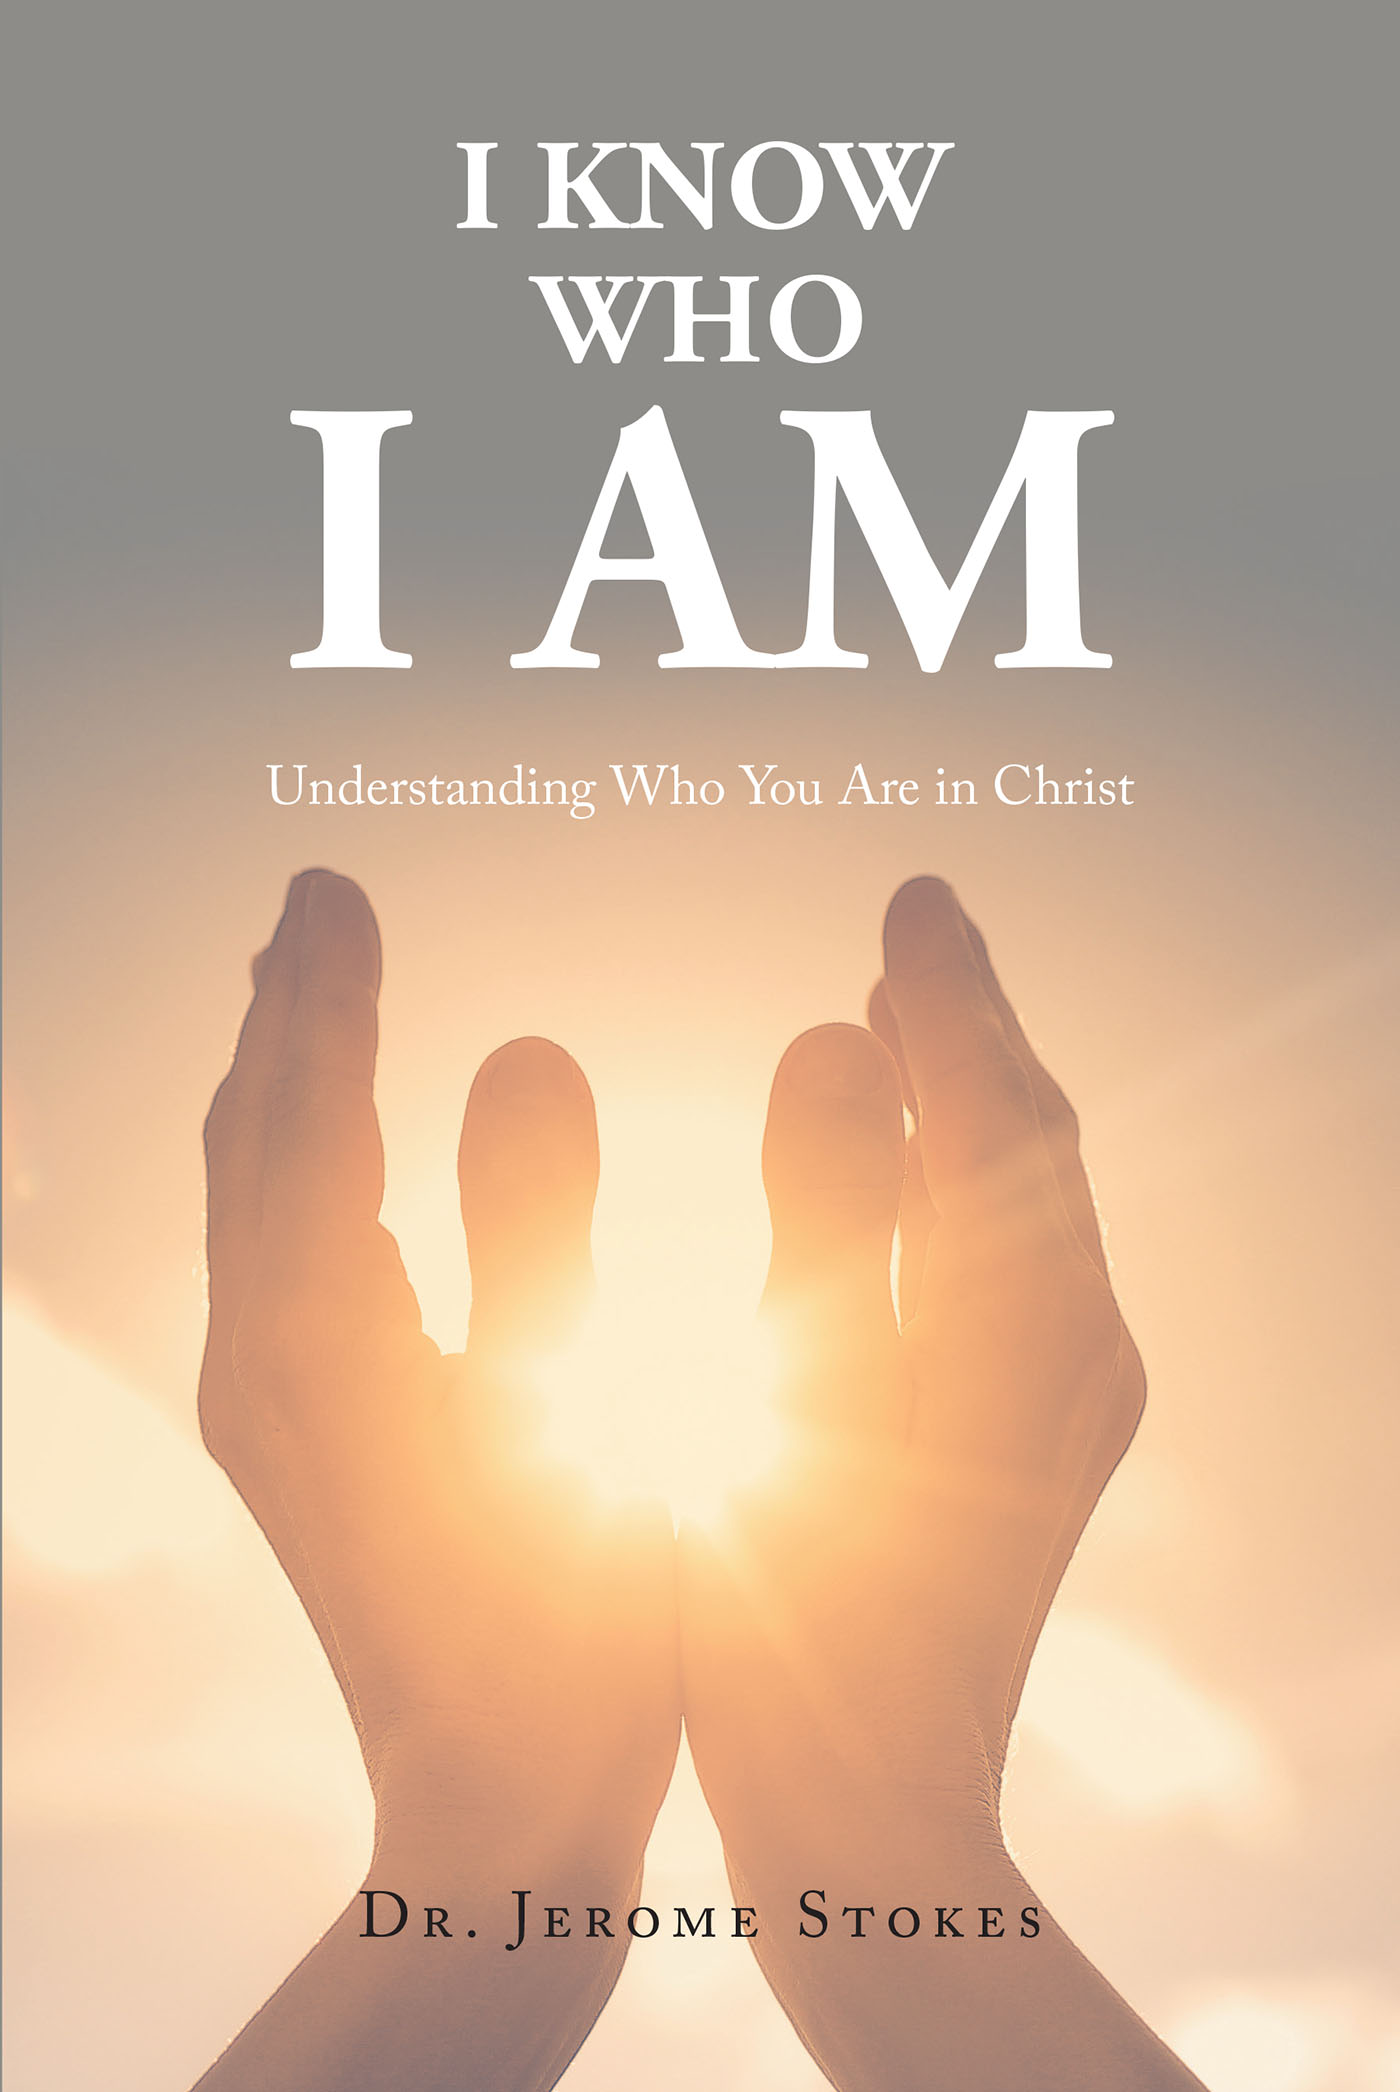 Dr. Jerome Stokes’s Newly Released “I Know Who I AM: Understanding Who You Are in Christ” is an Engaging Weekly Exercise of Faith